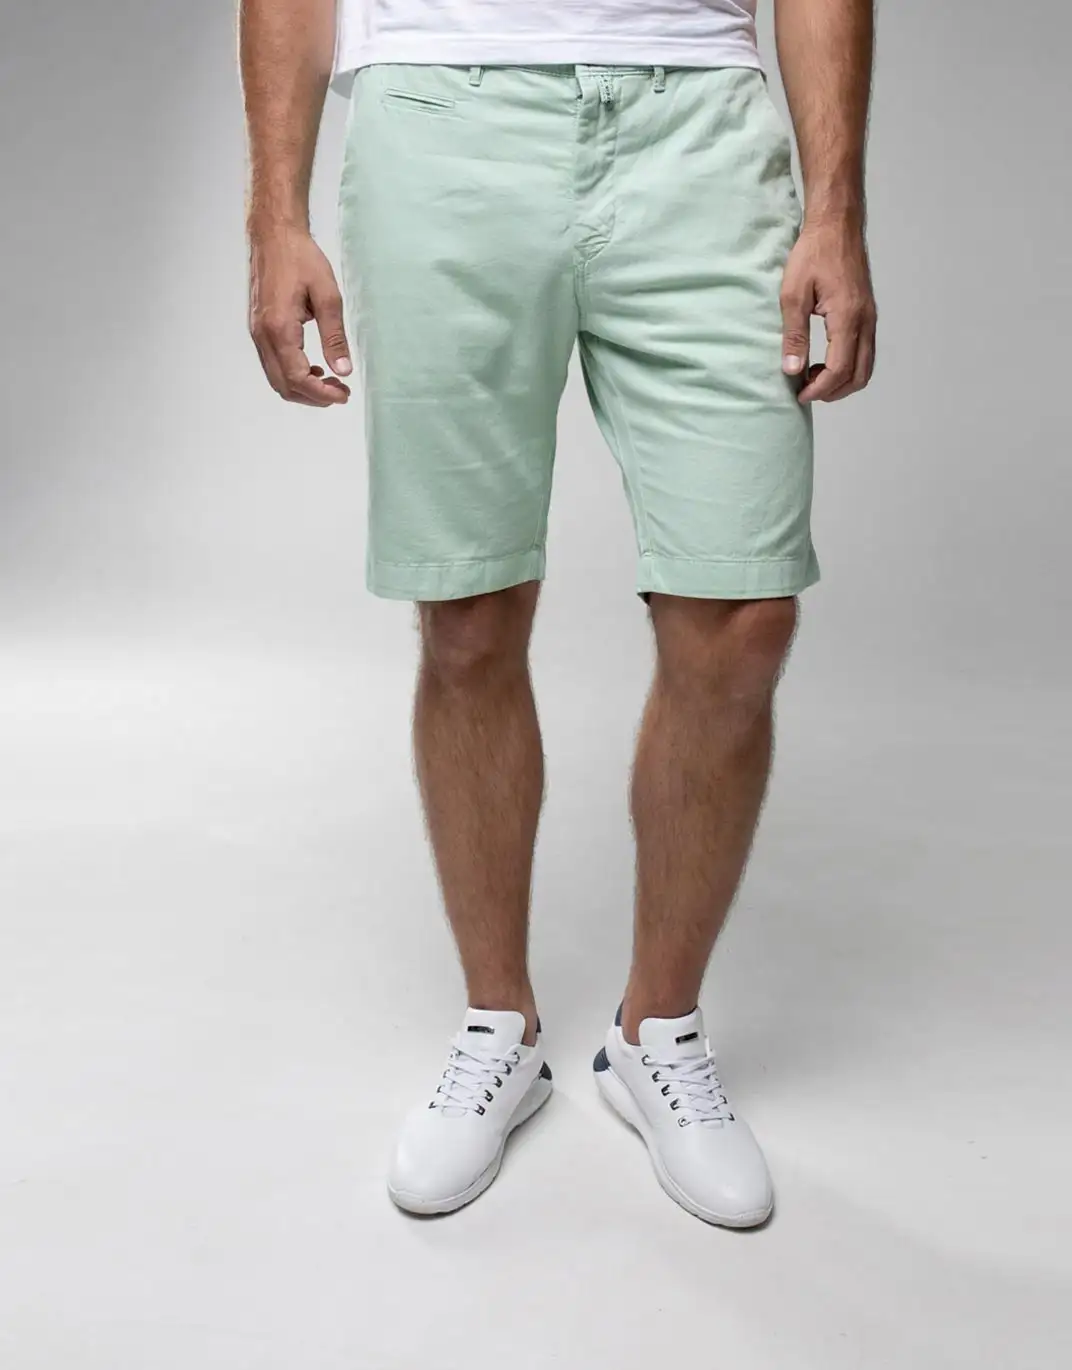 Cardin shorts from the Future Flex collection in light green 34770/5017/5002 ᐈ Price ᐈ Buy in the online store Pierre Cardin